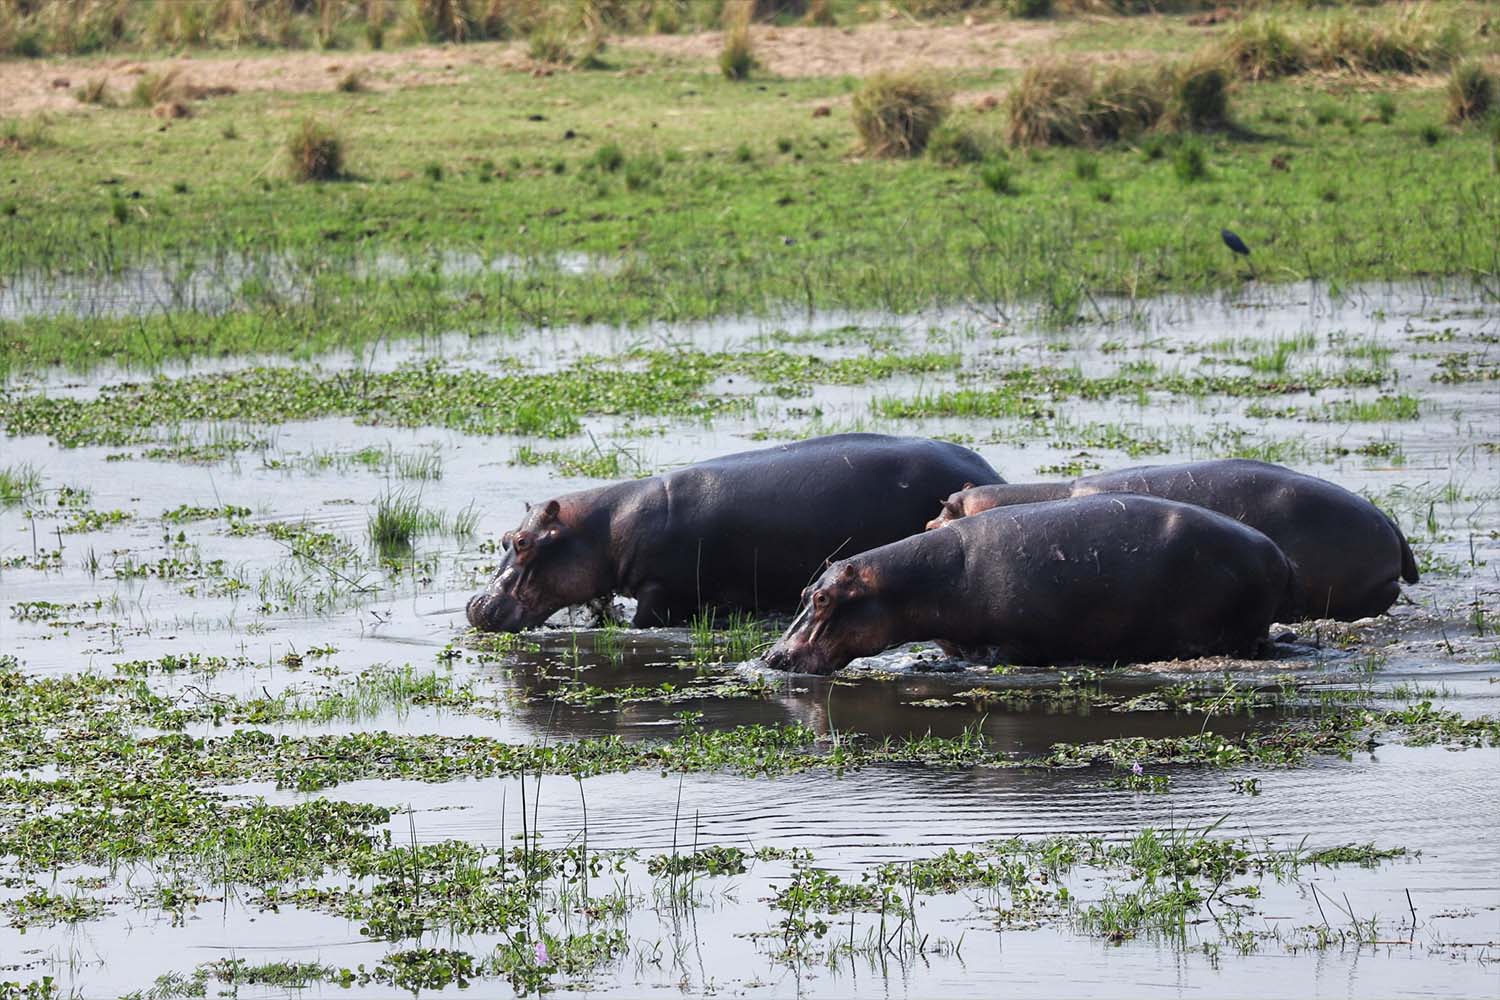 Hippos in the river